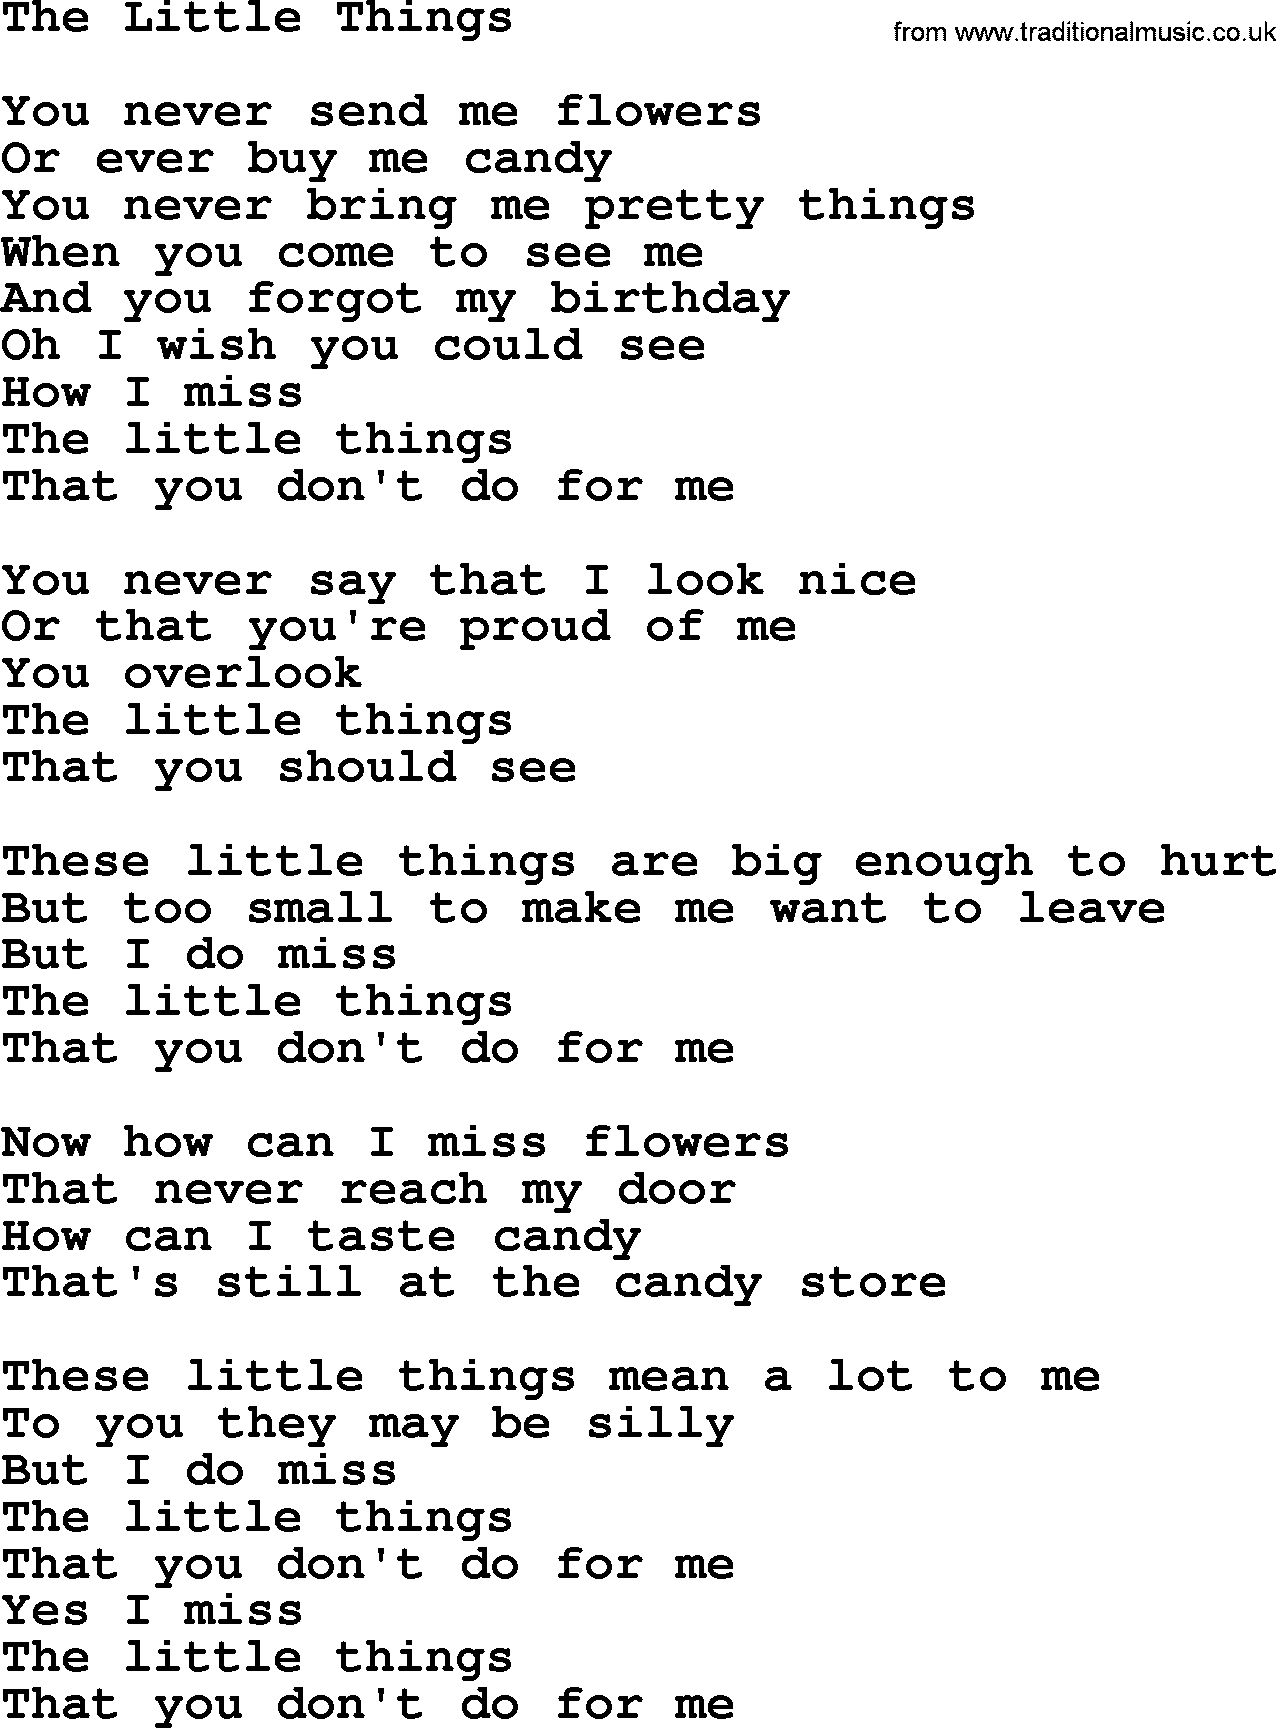 Dolly Parton song The Little Things.txt lyrics